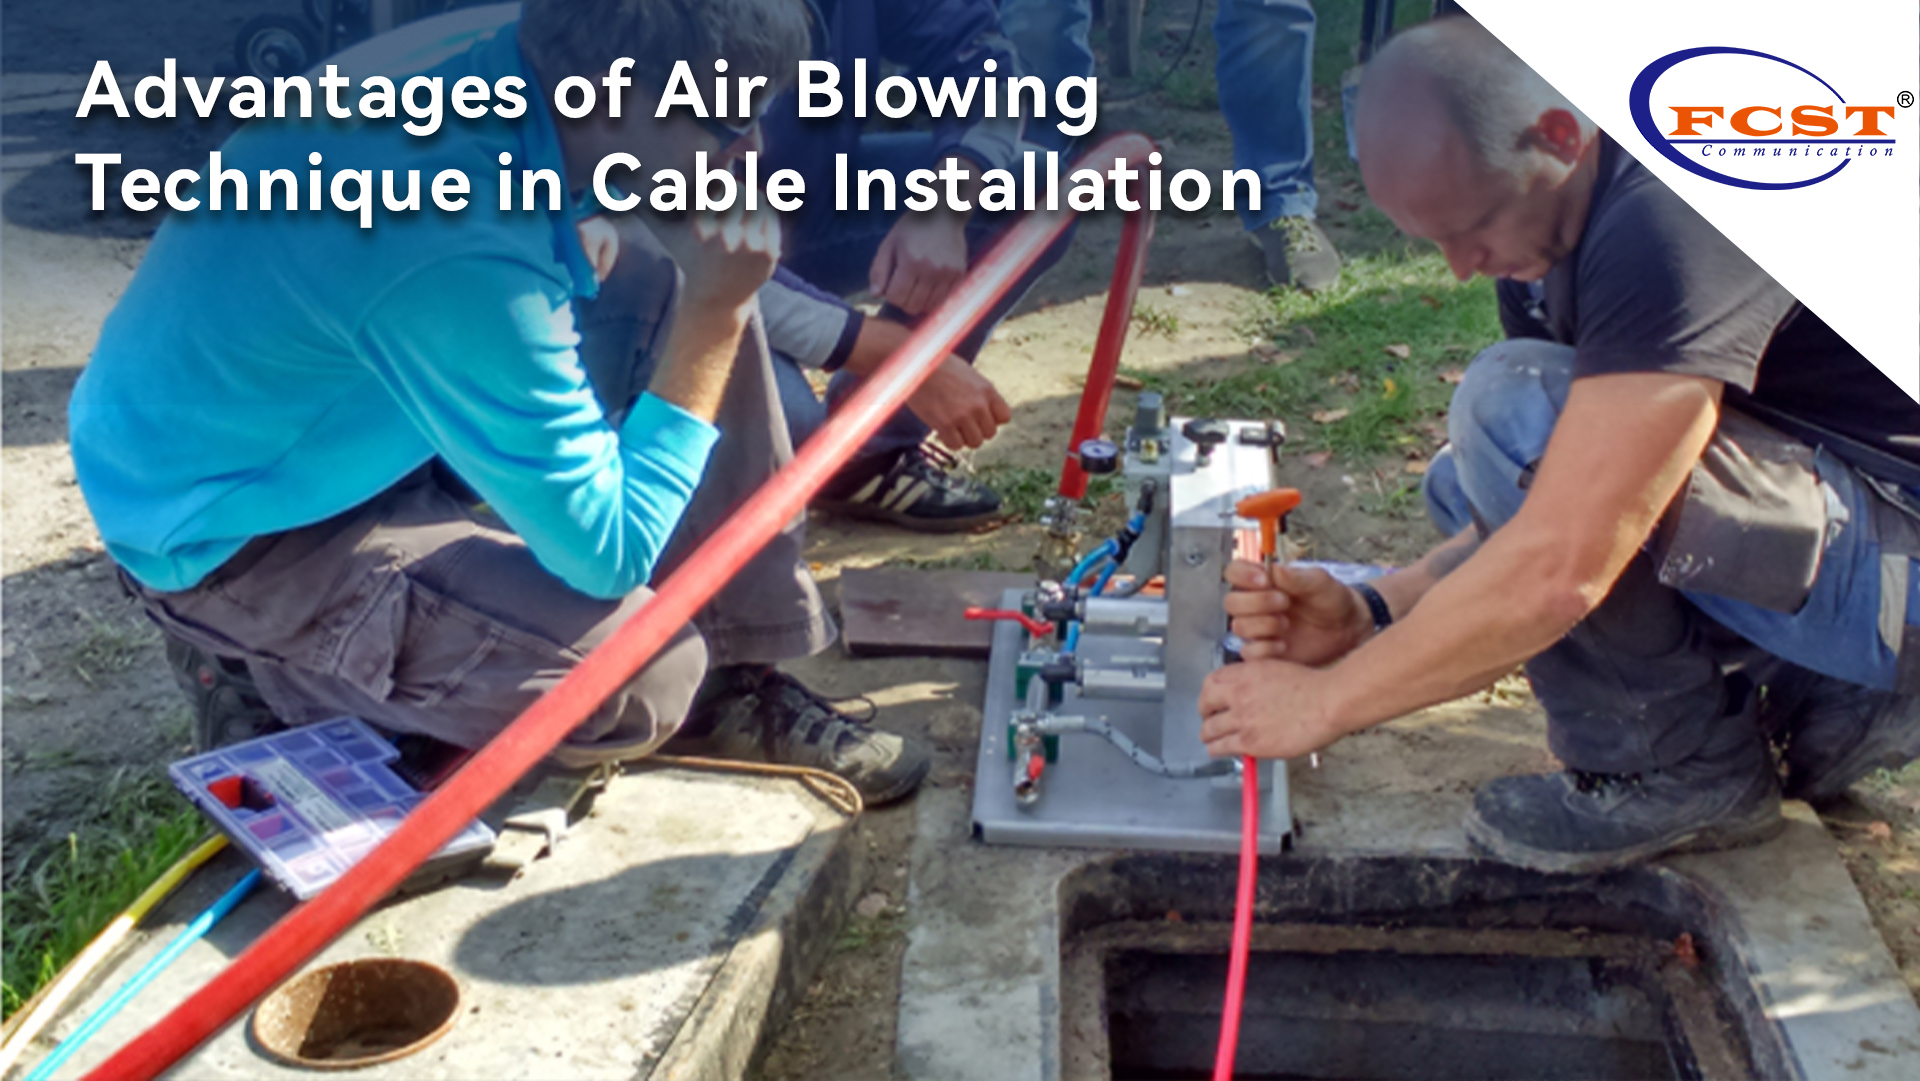 Advantages of Air Blowing Technique in Cable Installation